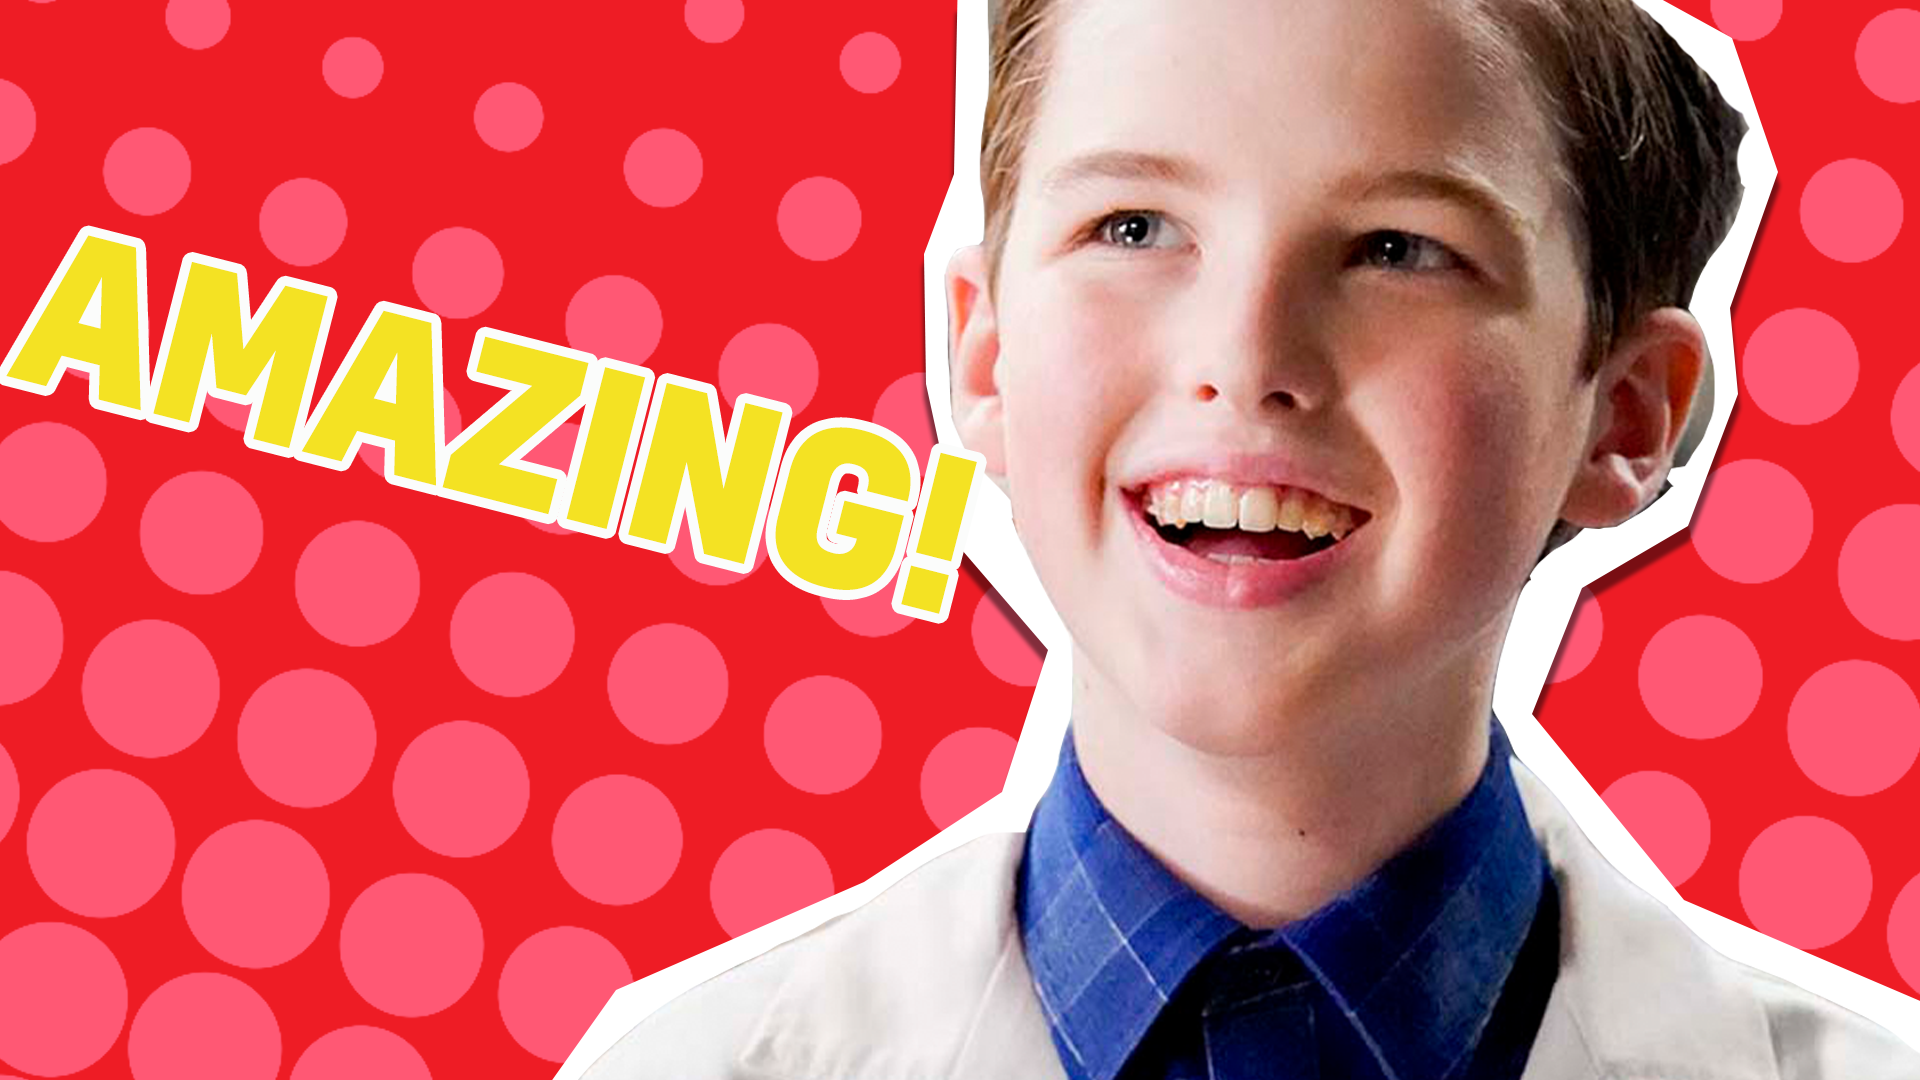 Incredible! You're officially a Young Sheldon mastermind, because you got 100% correct answers! Bravo!